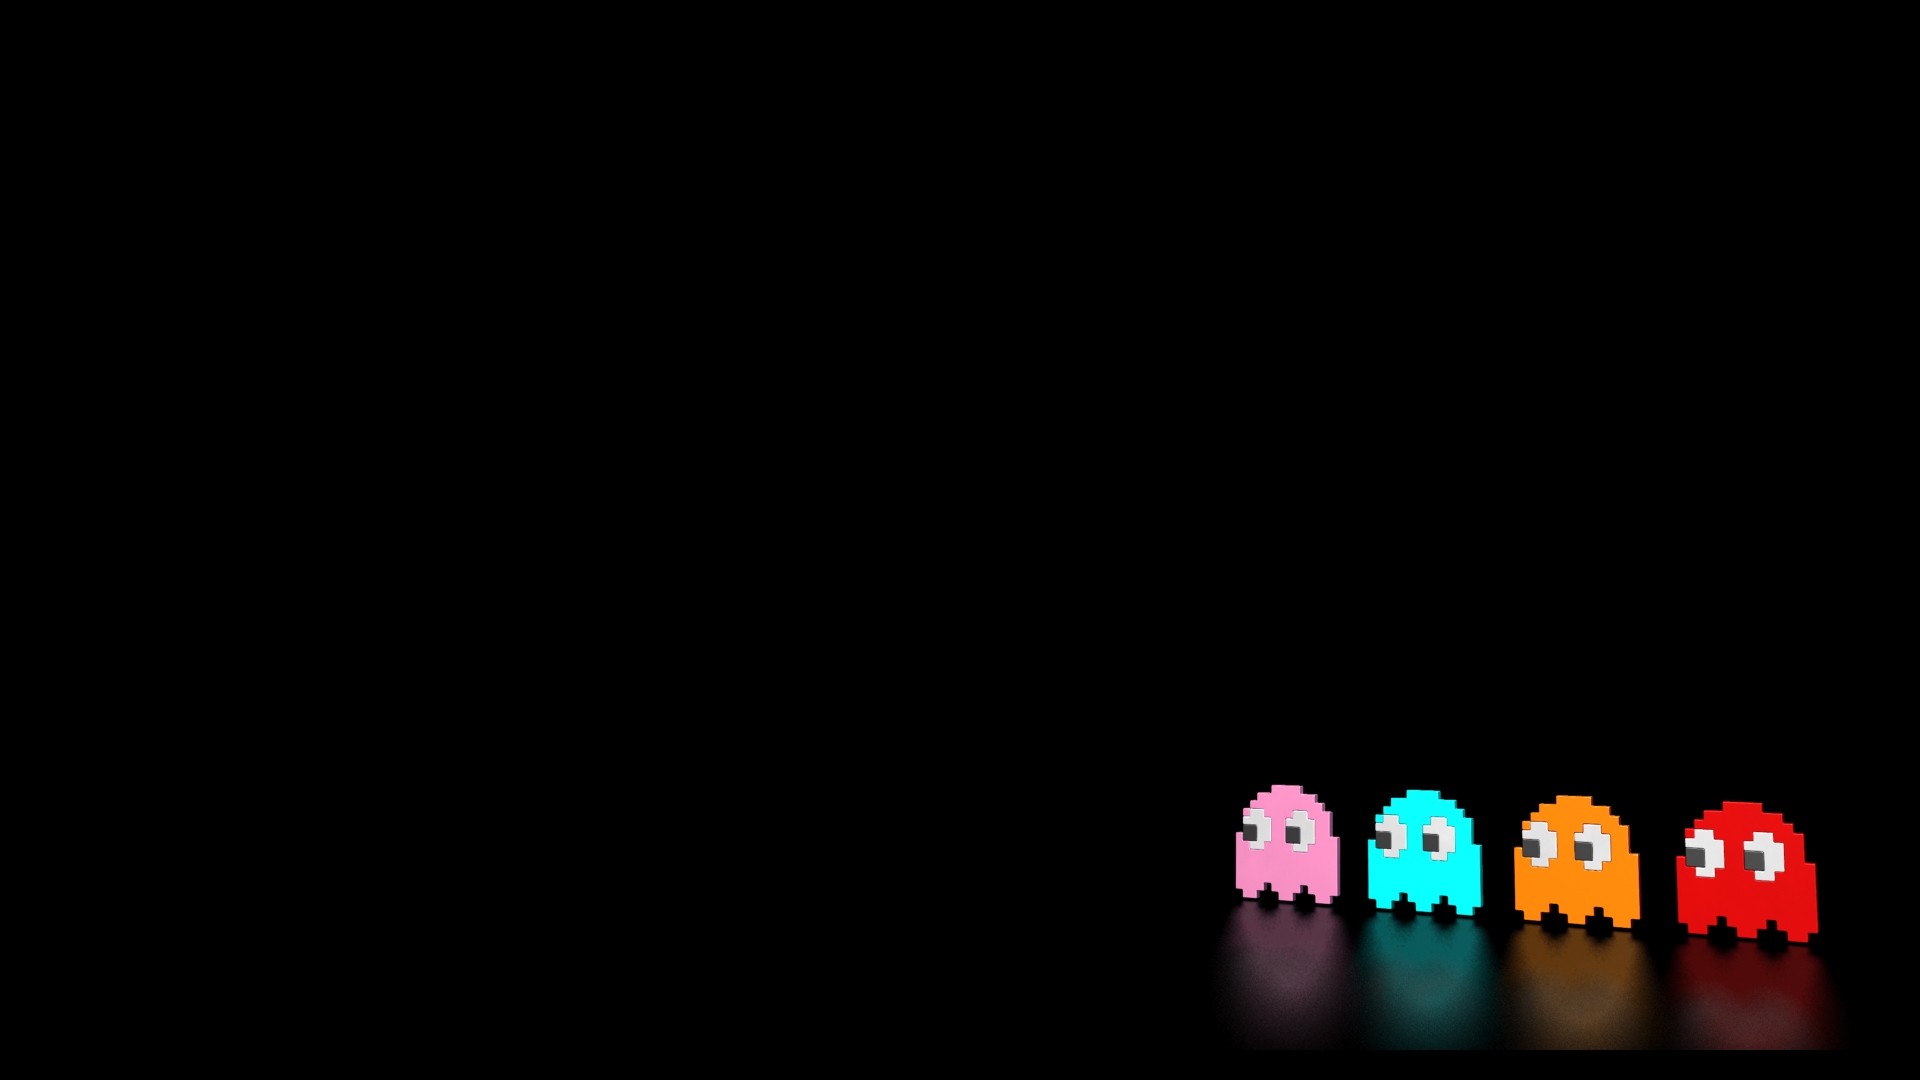 1920x1080 Pacman Ghosts Wallpaper, Reflective Pacman Ghosts iPhone Wallpaper .